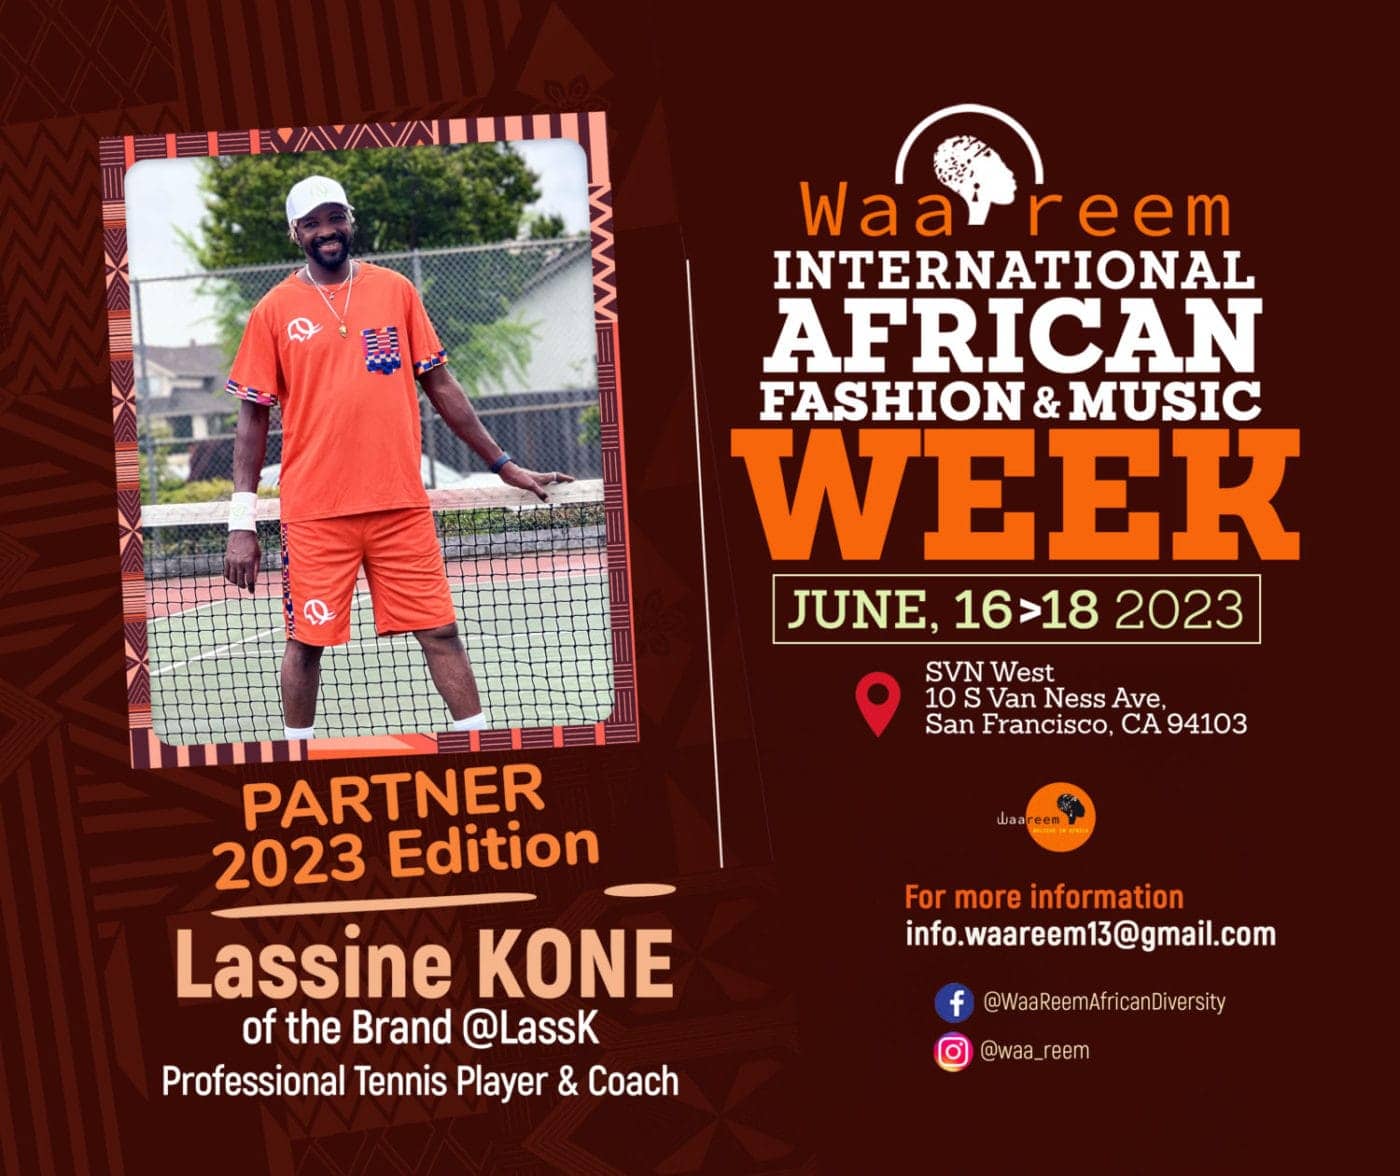 ANNONCE-WAAREEM-23-LASSINE-KONE-1400x1176, WAA REEM: International Fashion and Music Week in San Francisco June 16-18, Culture Currents Featured News & Views Opportunities 